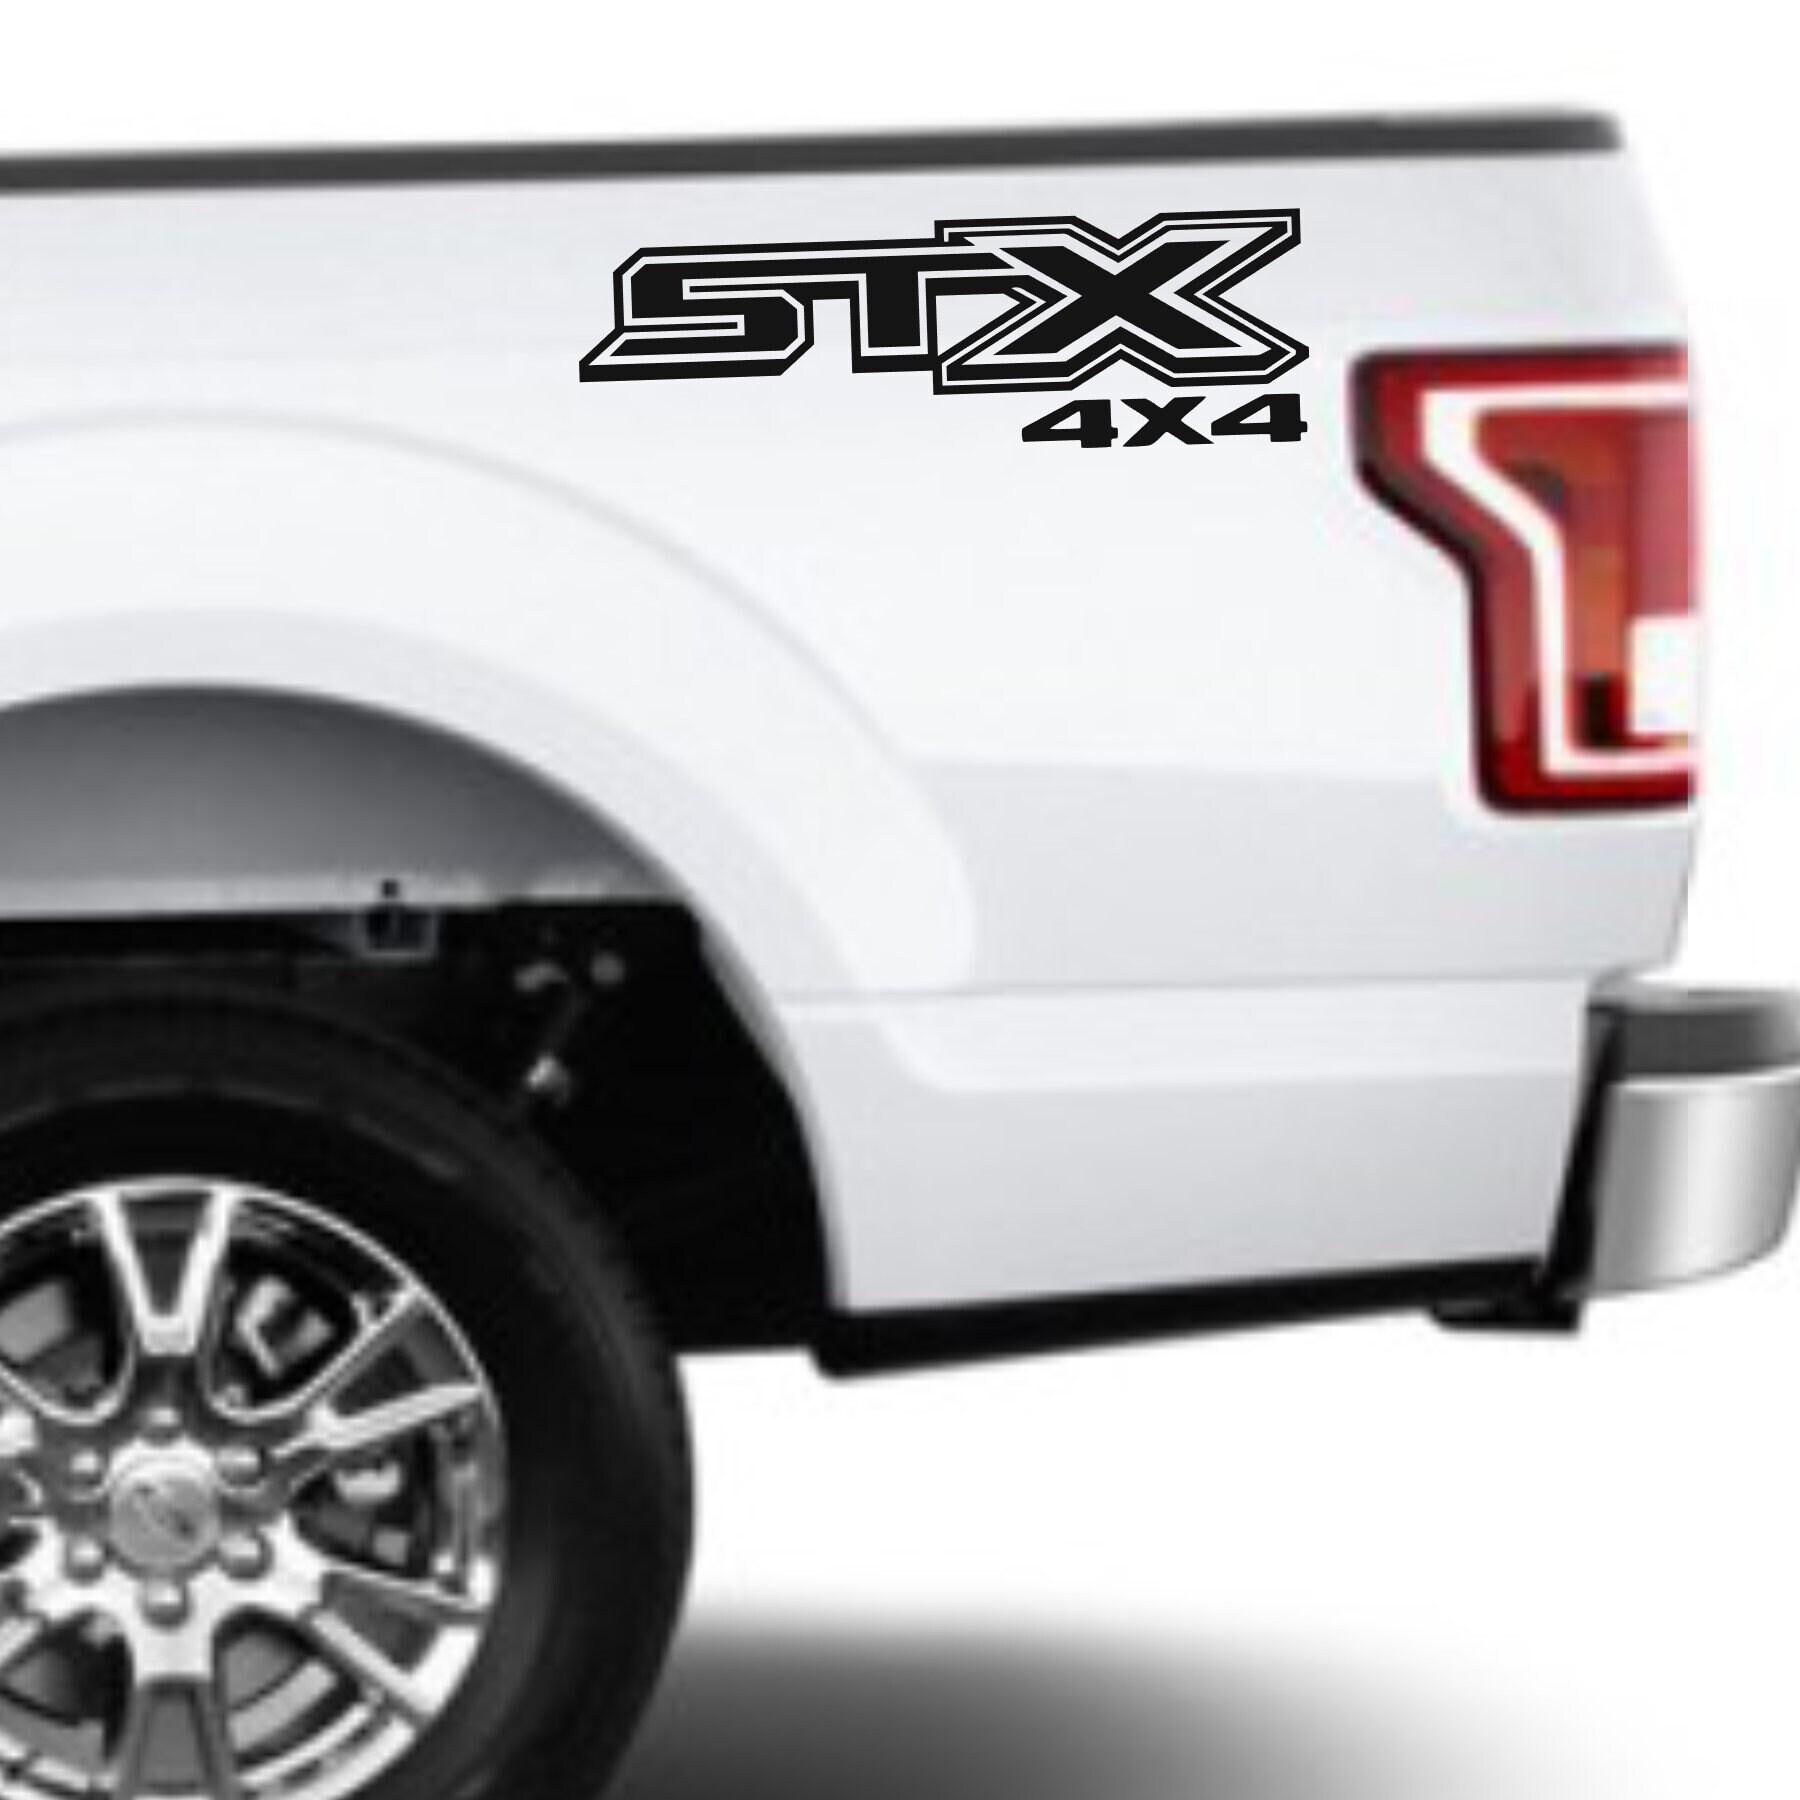 Ford STX 4x4 Off Road Wall Art Size Edwin Group of Companies Ford STX 4x4 Off Road Window Decal 4 x 4 Bumper Vinyl Patch Poster Banner 